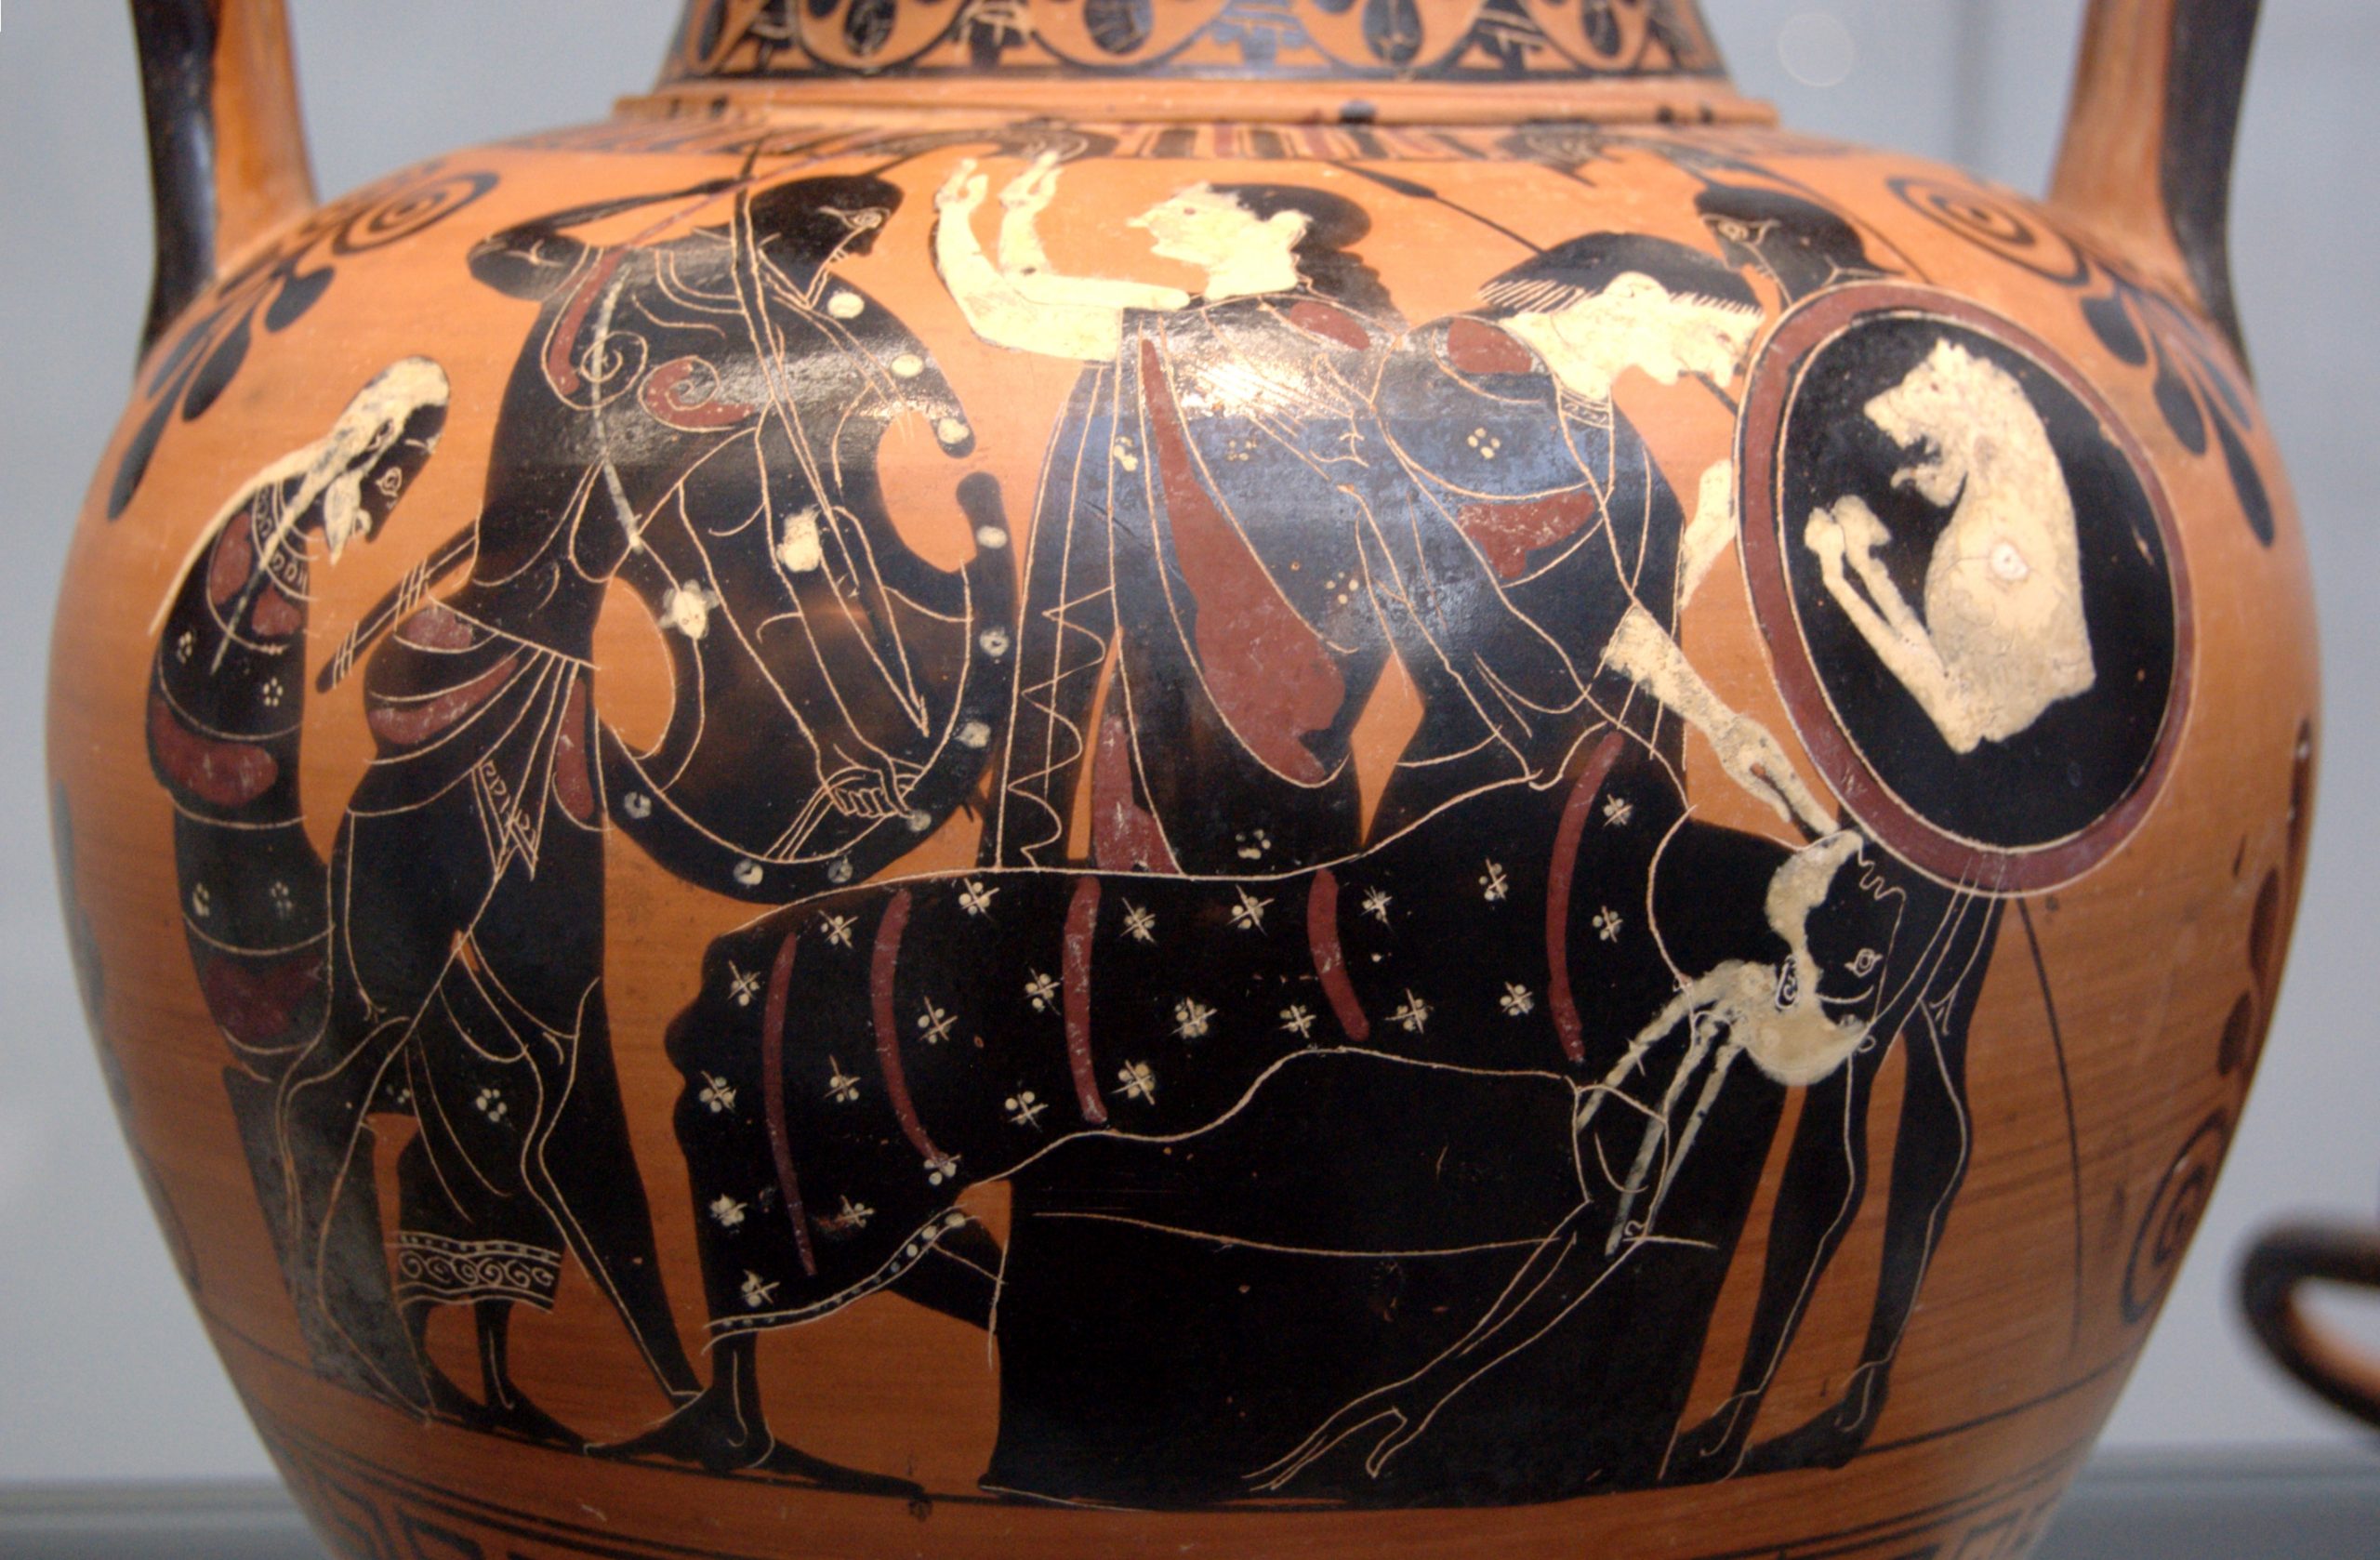 Priam, with white hair and beard and a patterned garment, lies on an altar. Neoptolemus, in Greek armour, stabs towards him with a speer. Other figures, two women and two men, watch.